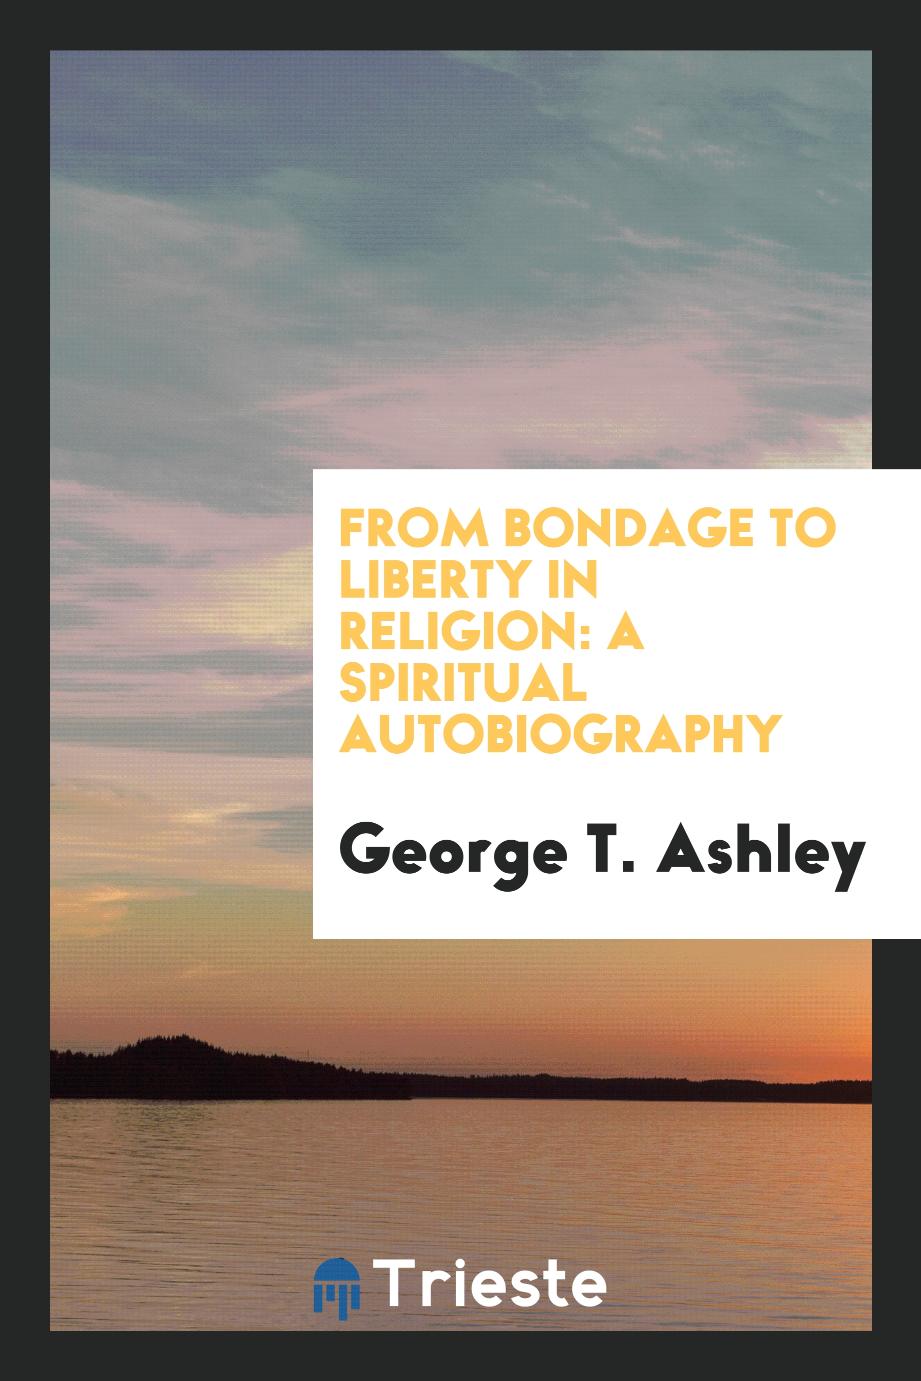 From Bondage to Liberty in Religion: A Spiritual Autobiography